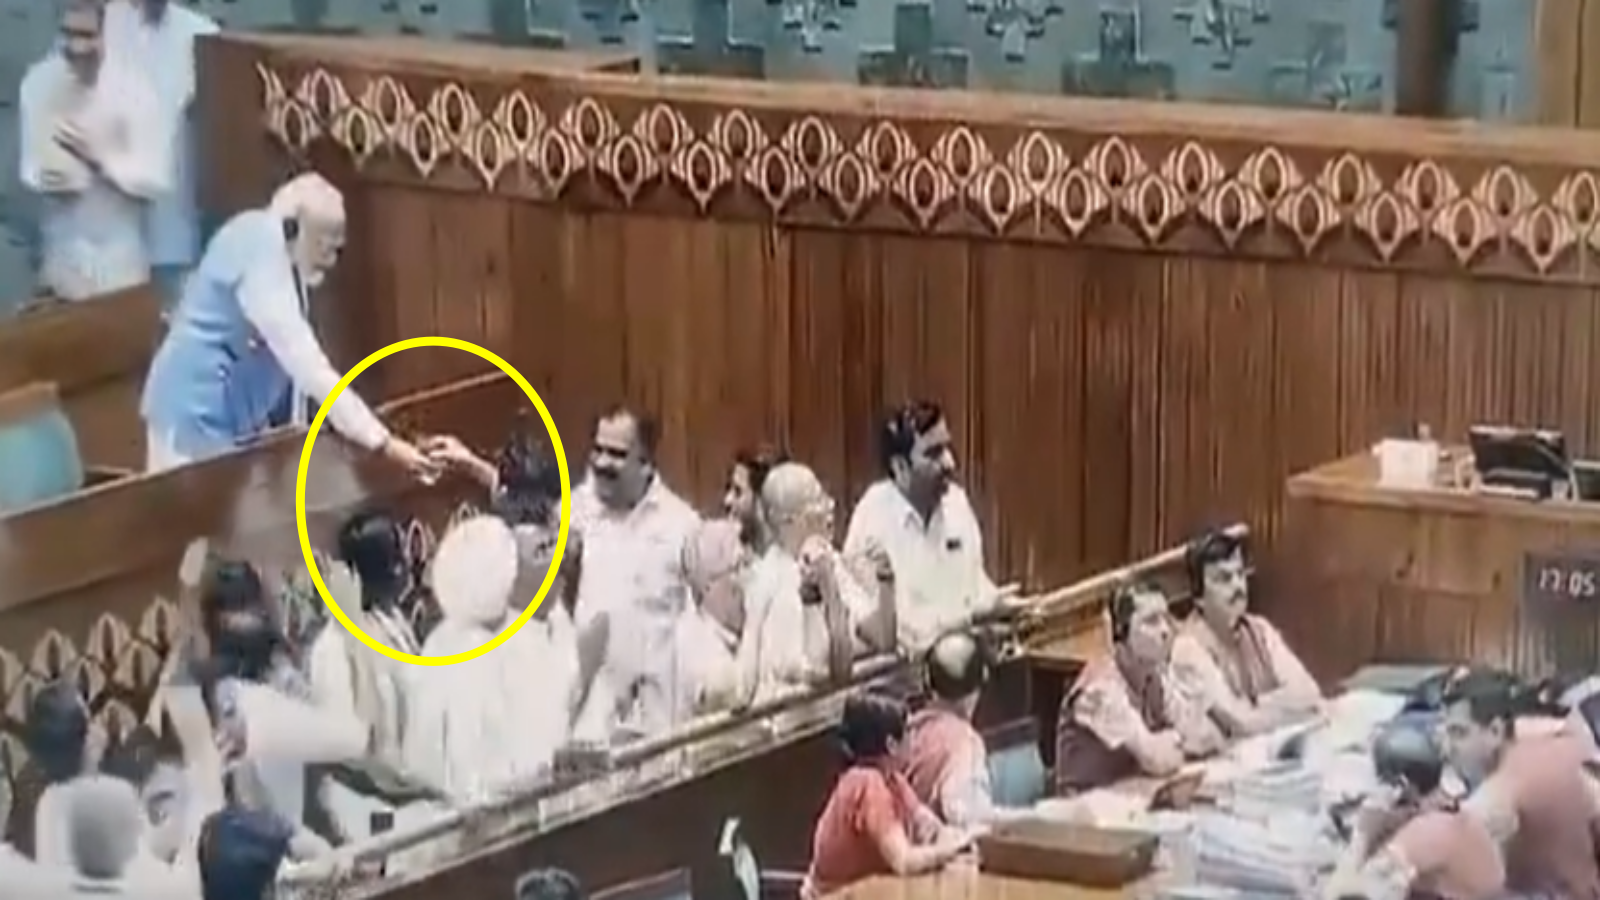 When PM Modi extended a glass of water towards the protesting opposition MPs, watch the video